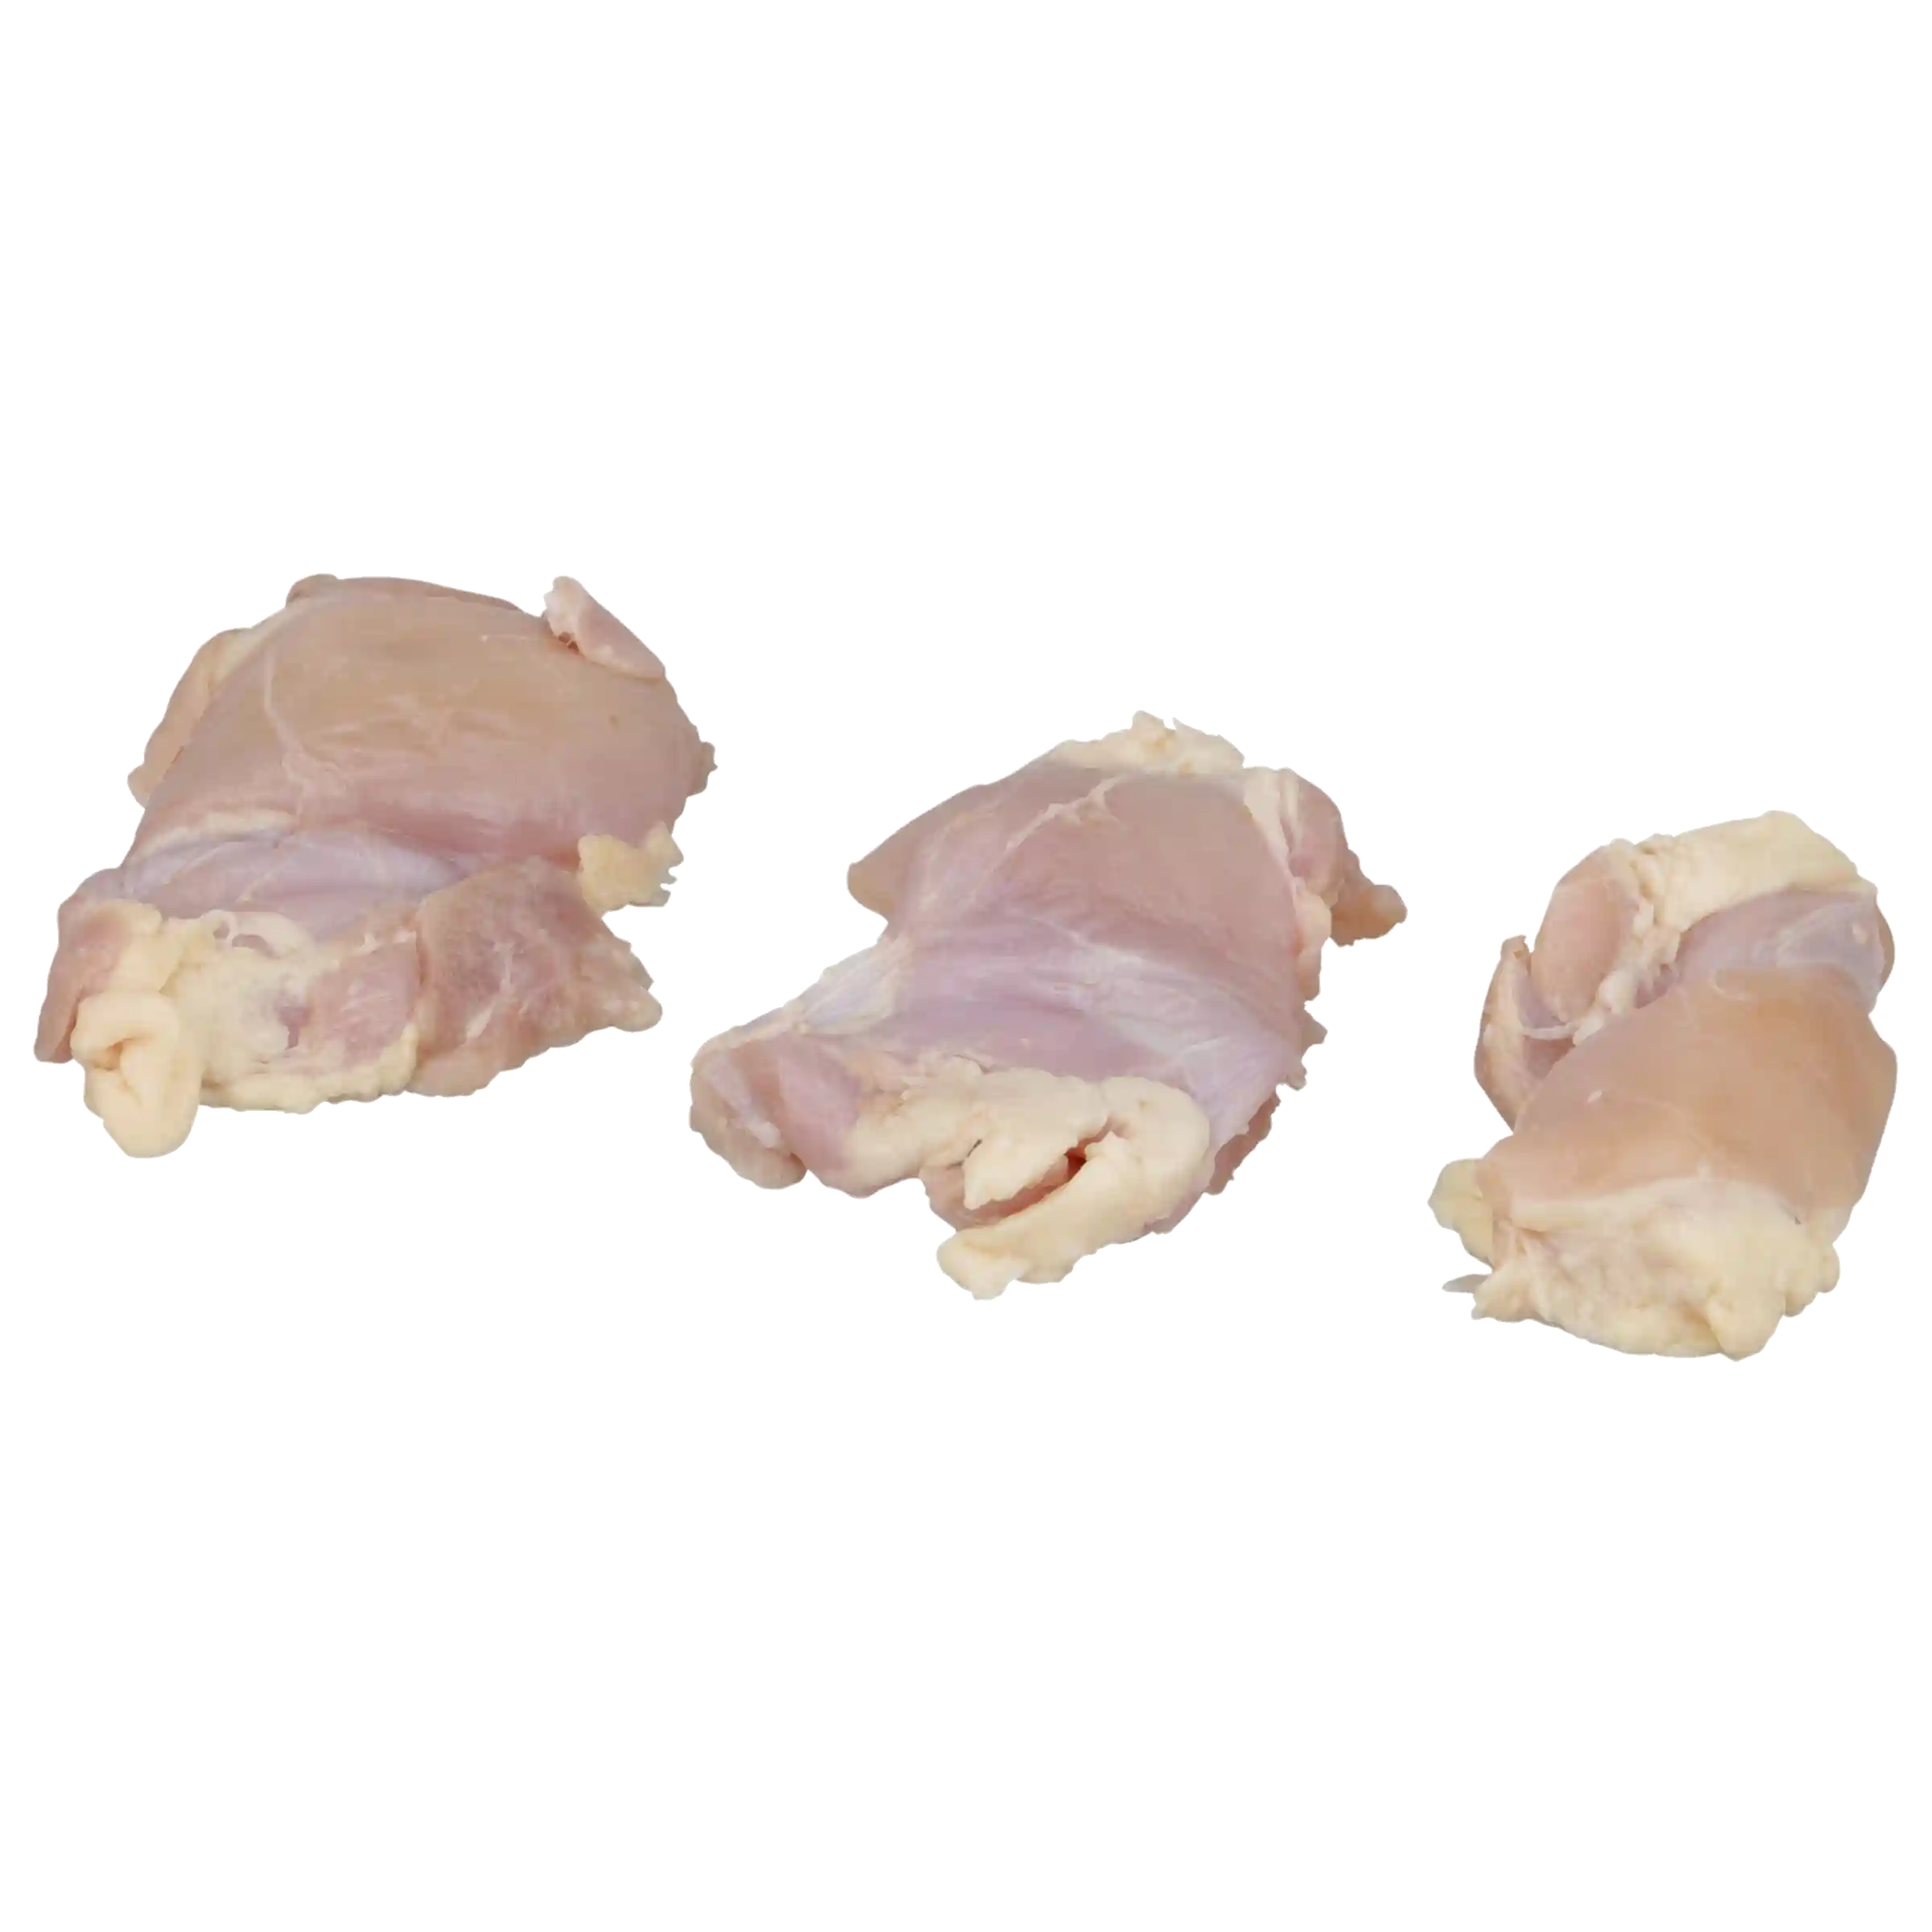 Tyson® Uncooked Boneless Skinless Thigh Meat_image_01